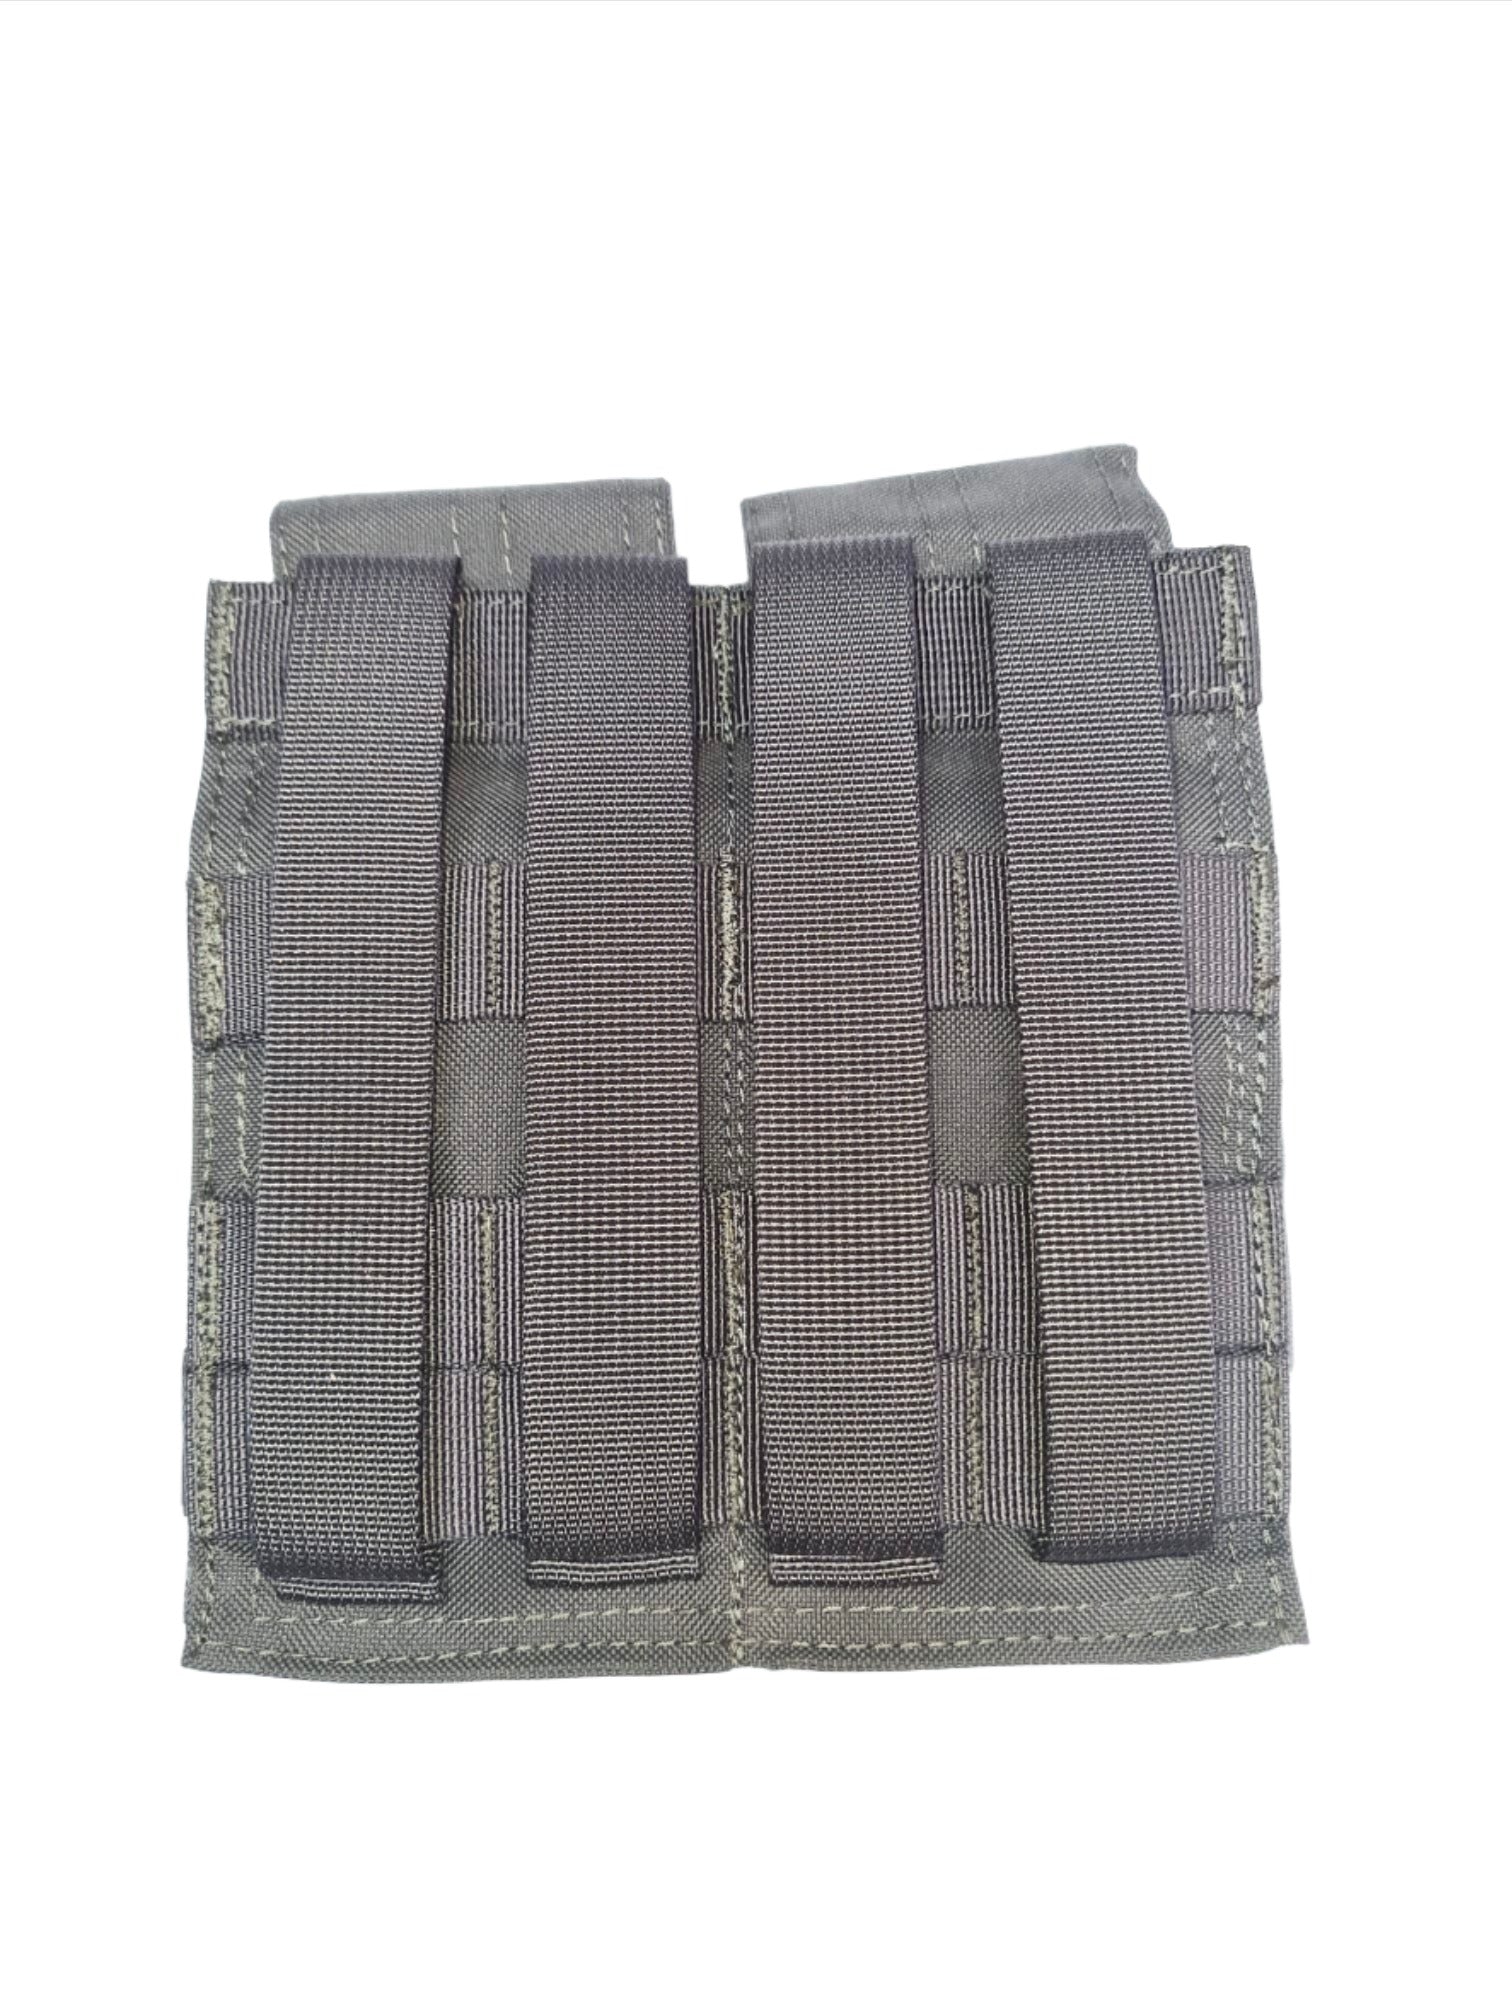 SHE-921 Double M4 5.56MM Mag Pouch WOLF GREY